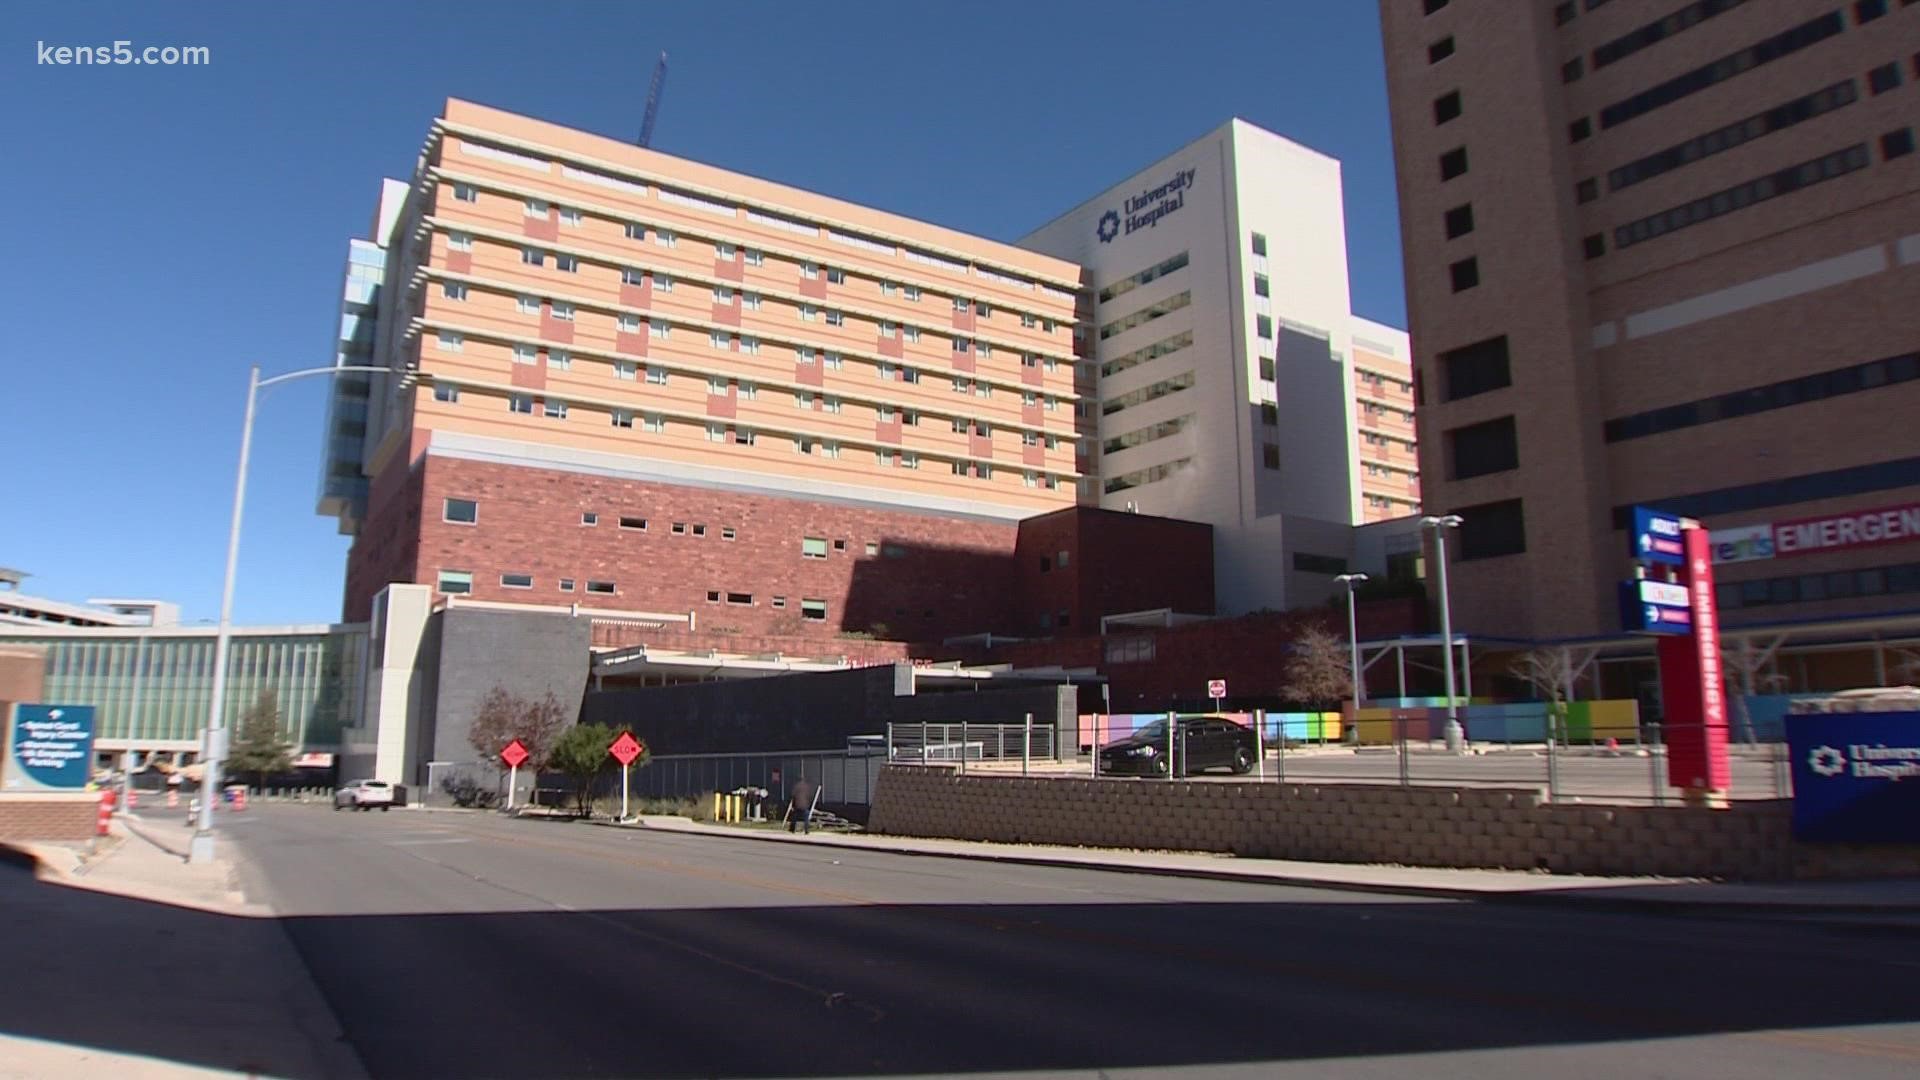 Organizations like University Hospital are trying to keep up with all the growth happening around them.